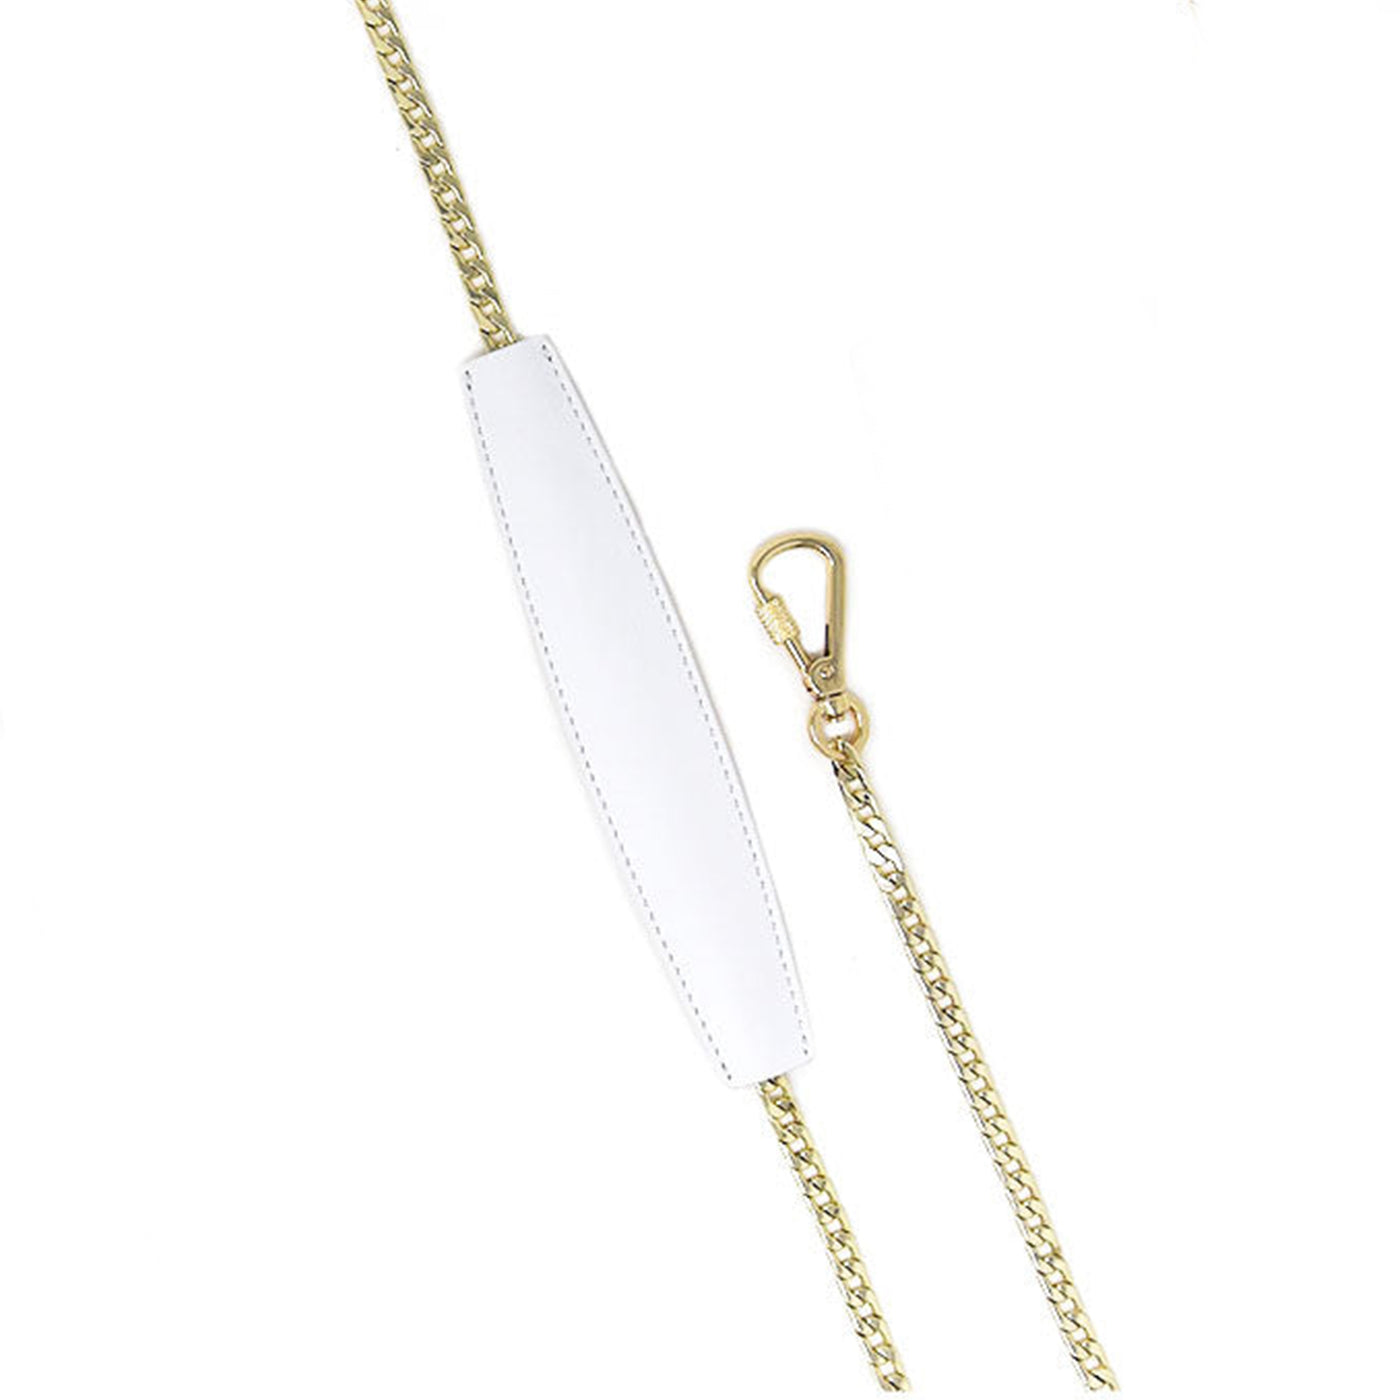 Locking Chain Strap with Shoulder Pad in White Gold